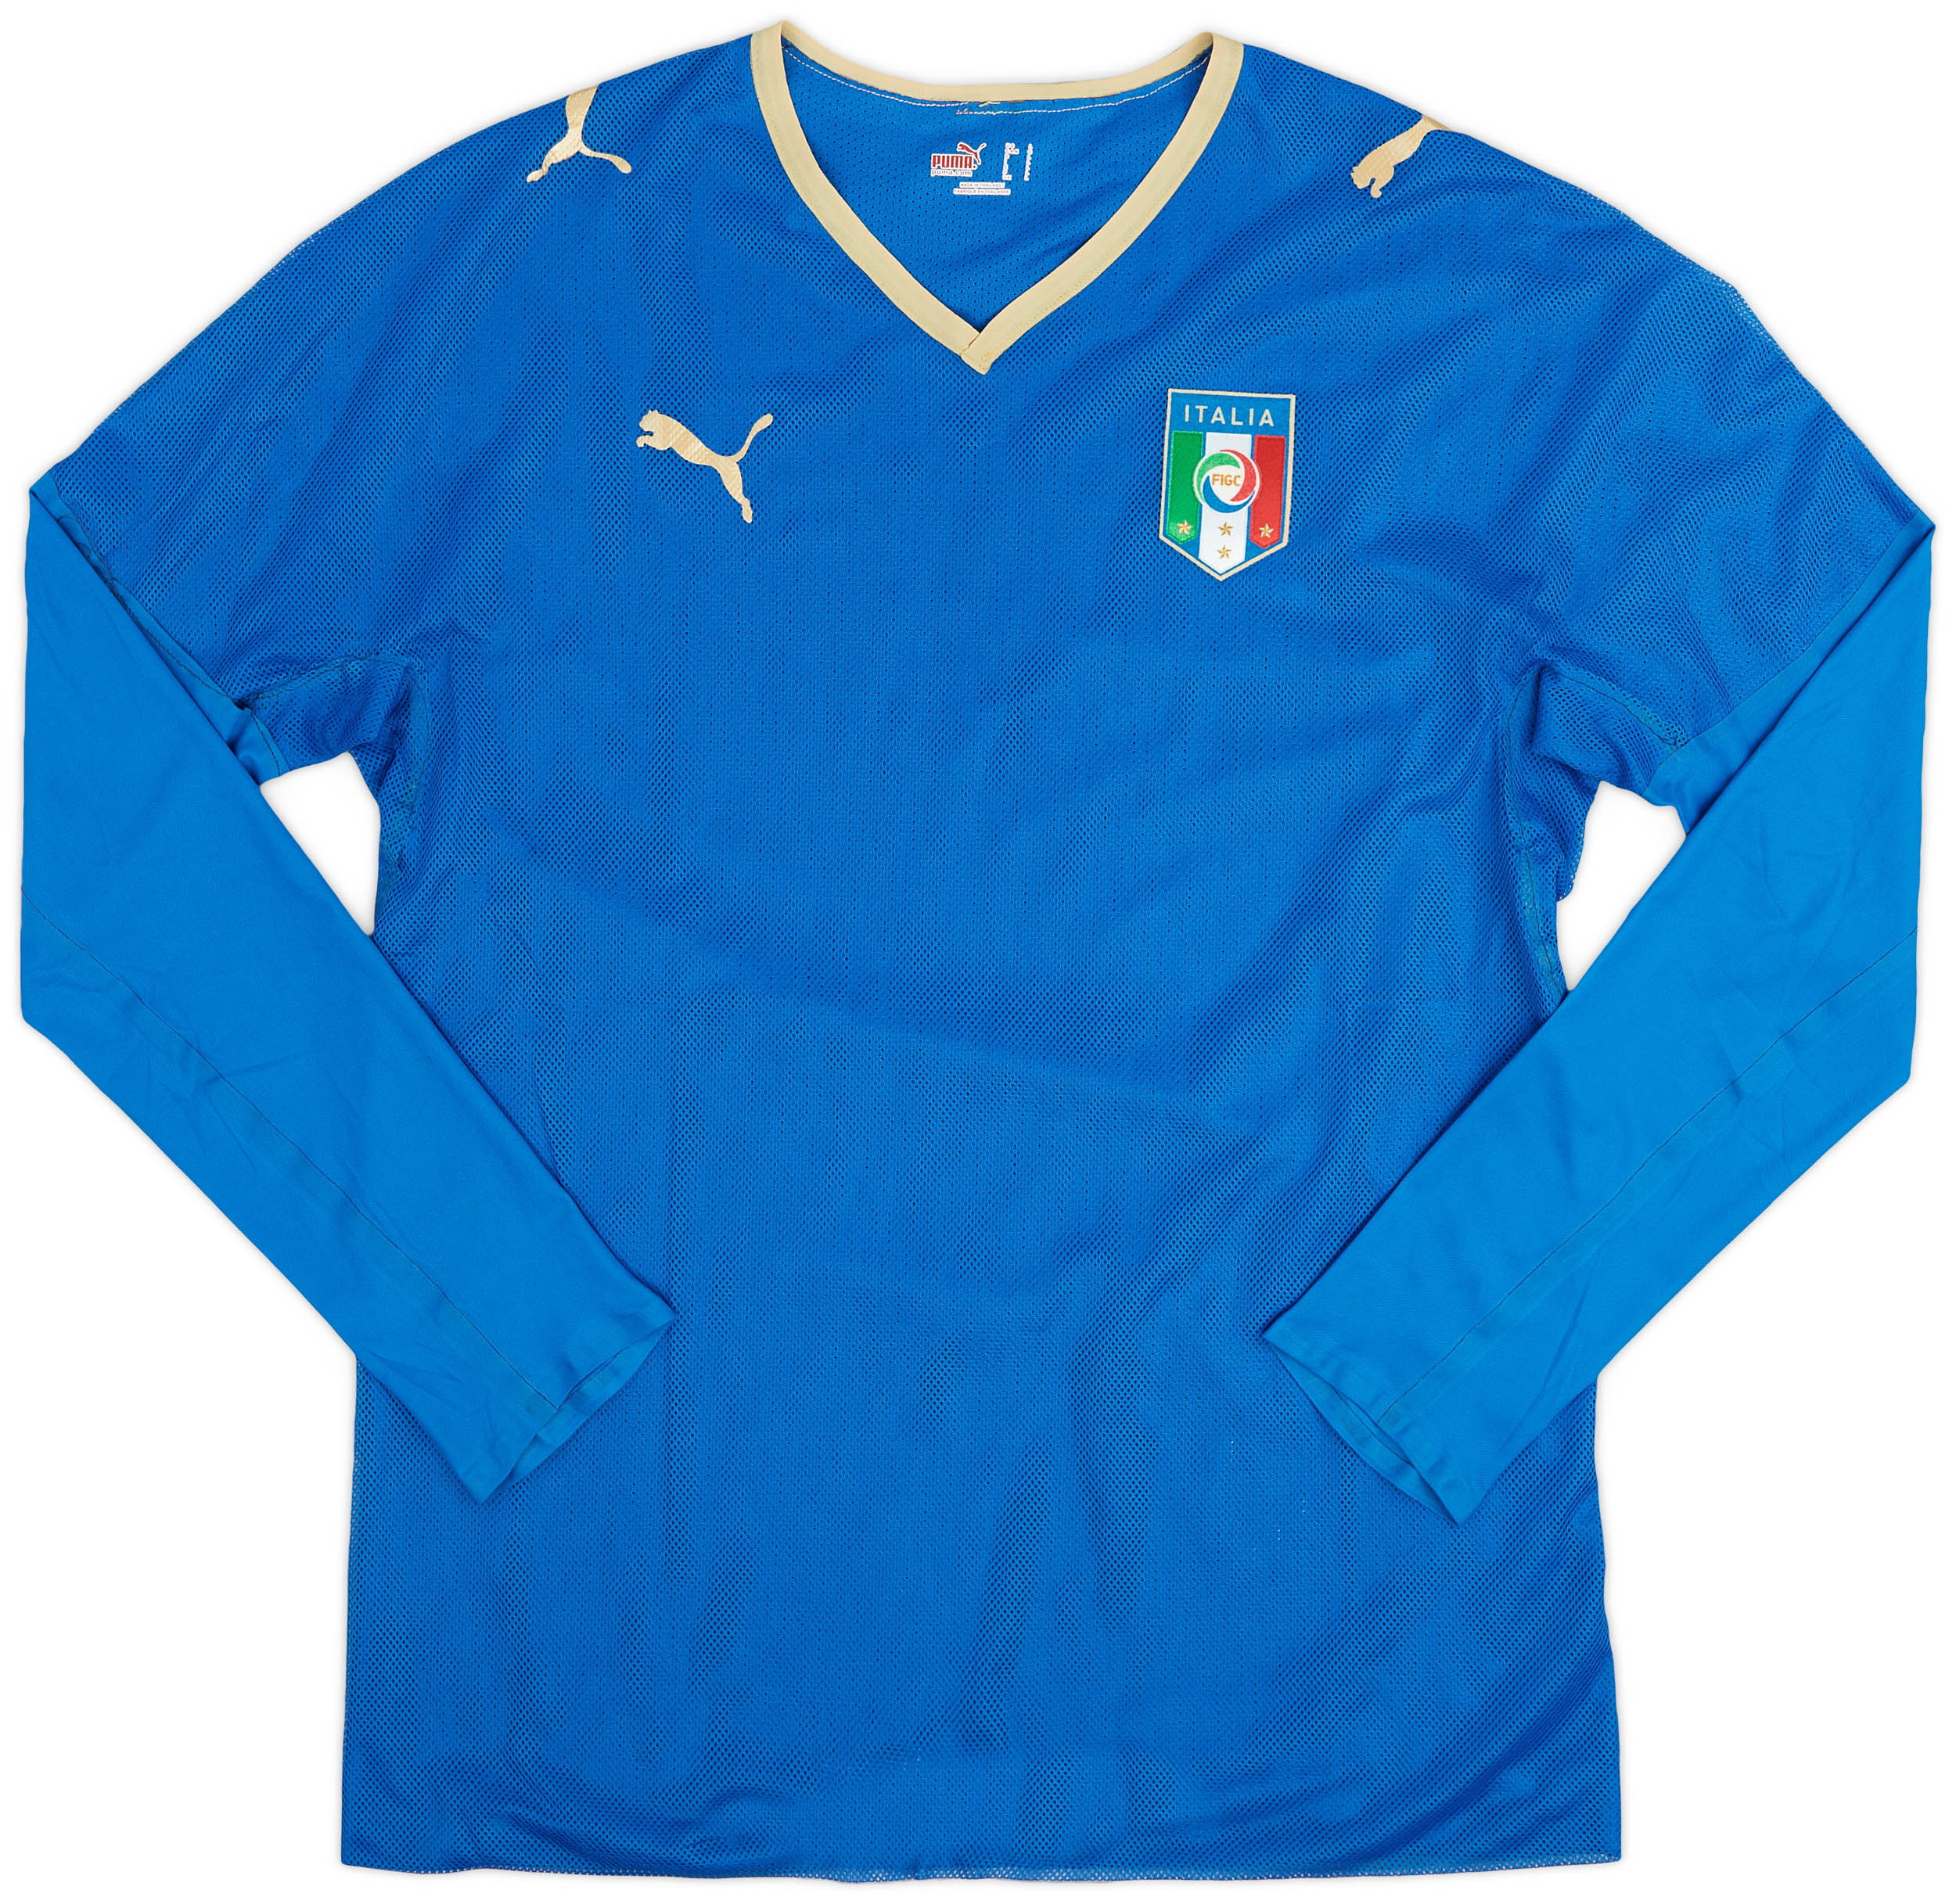 2007-08 Italy Player Issue Home Shirt - 5/10 - ()